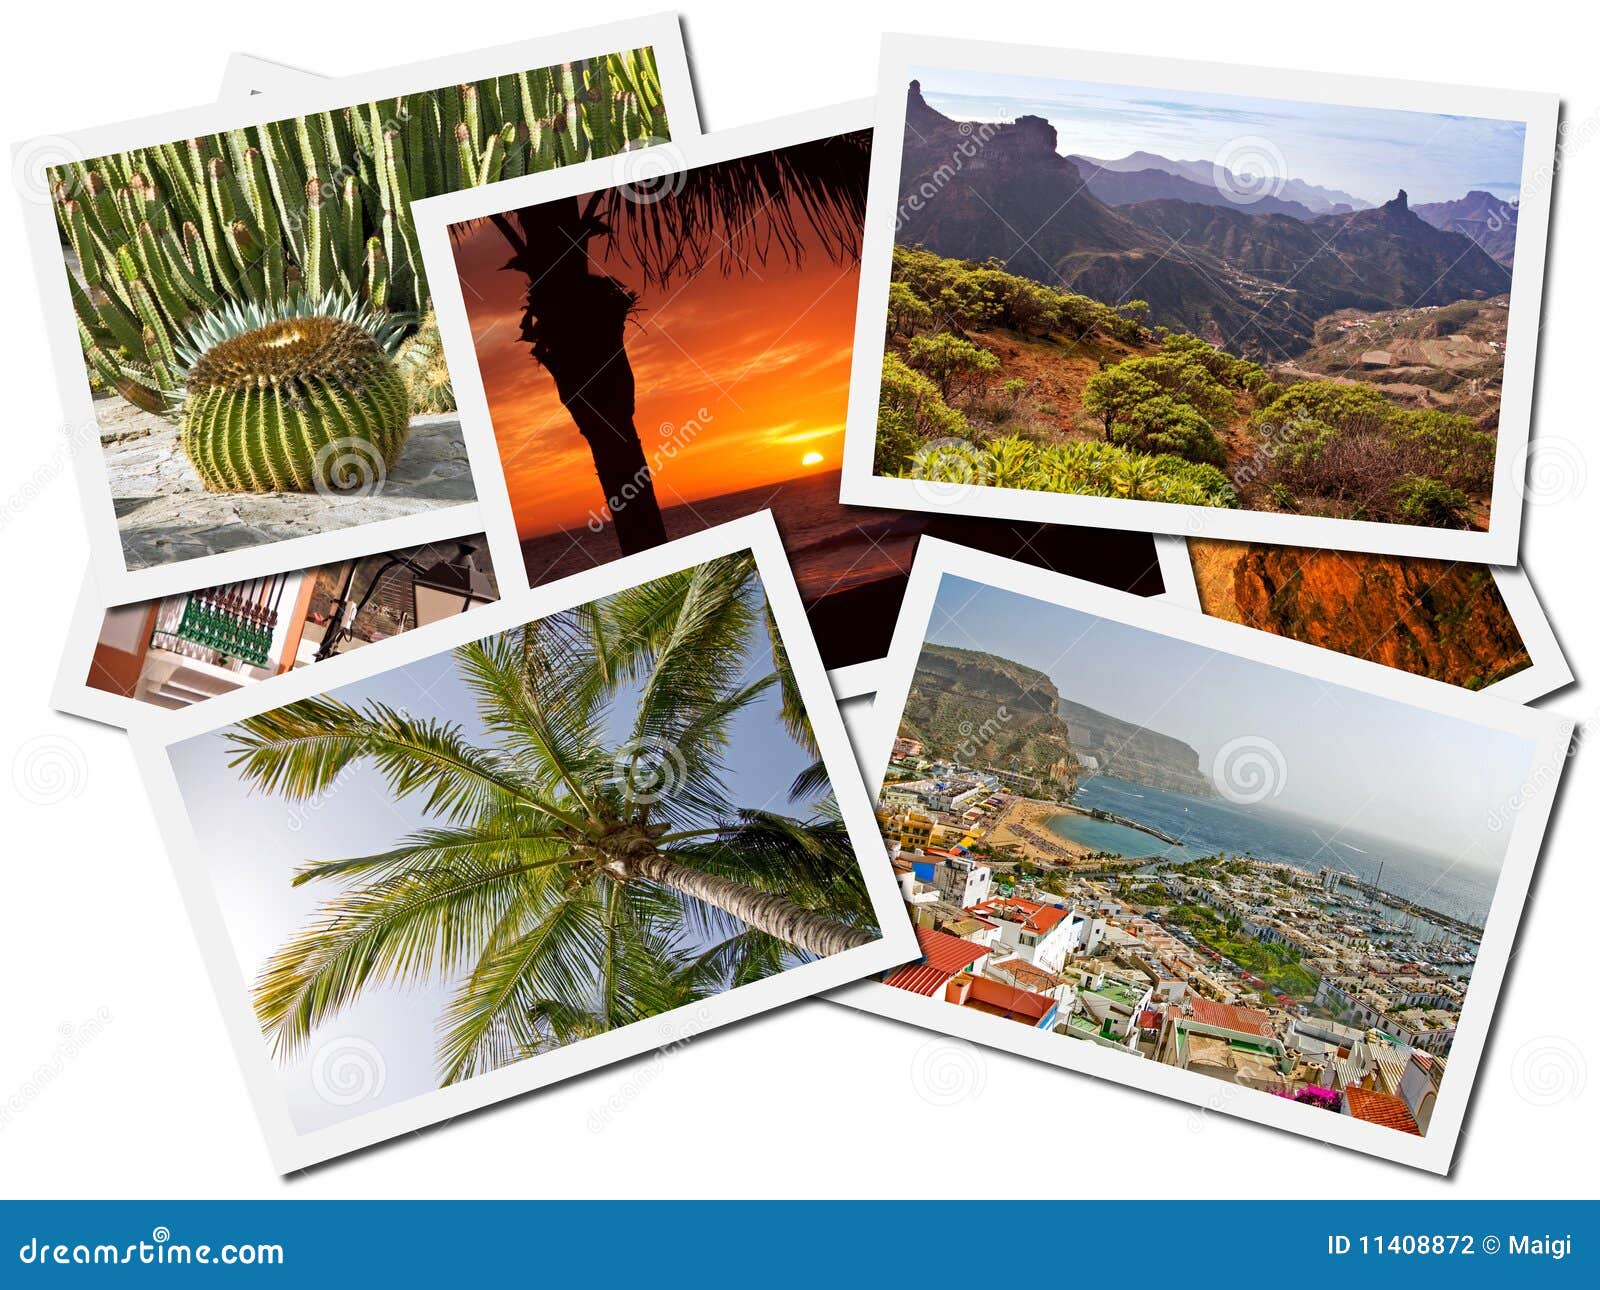 Canary Islands photo collage